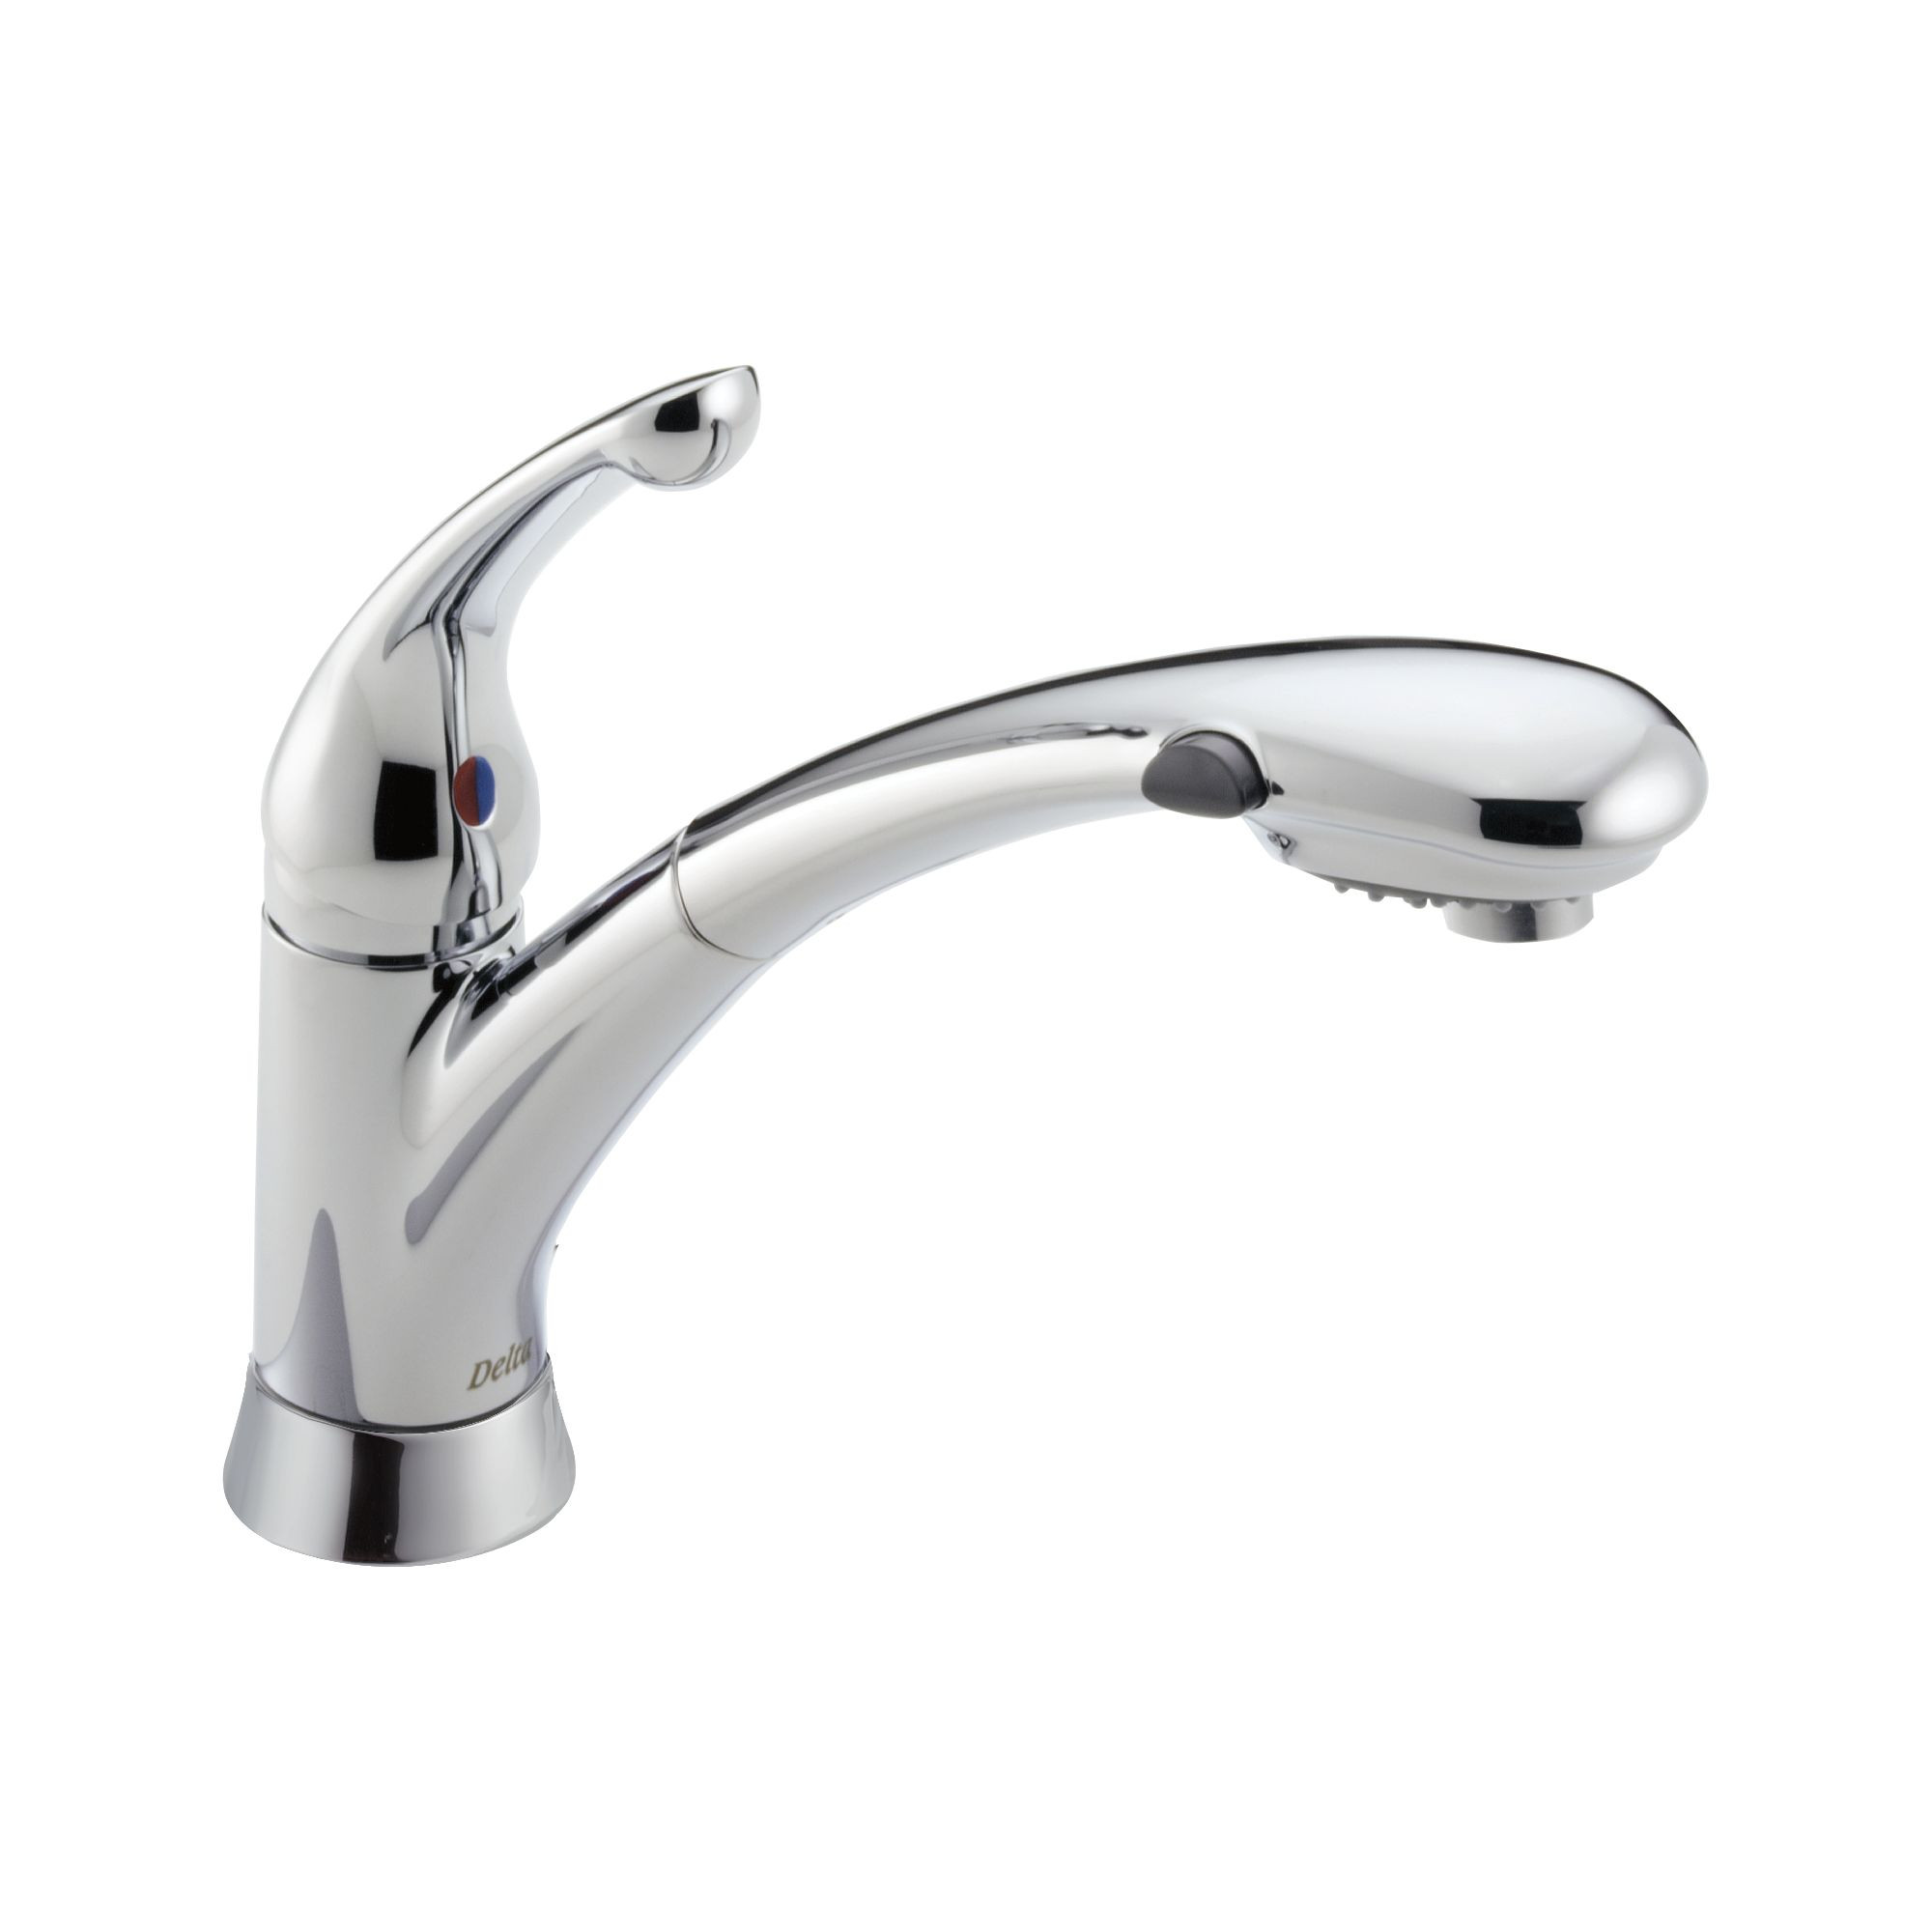 Delta White Kitchen Faucet
 DELTA SIGNATURE PULL OUT KITCHEN FAUCET Dynasty Bathrooms